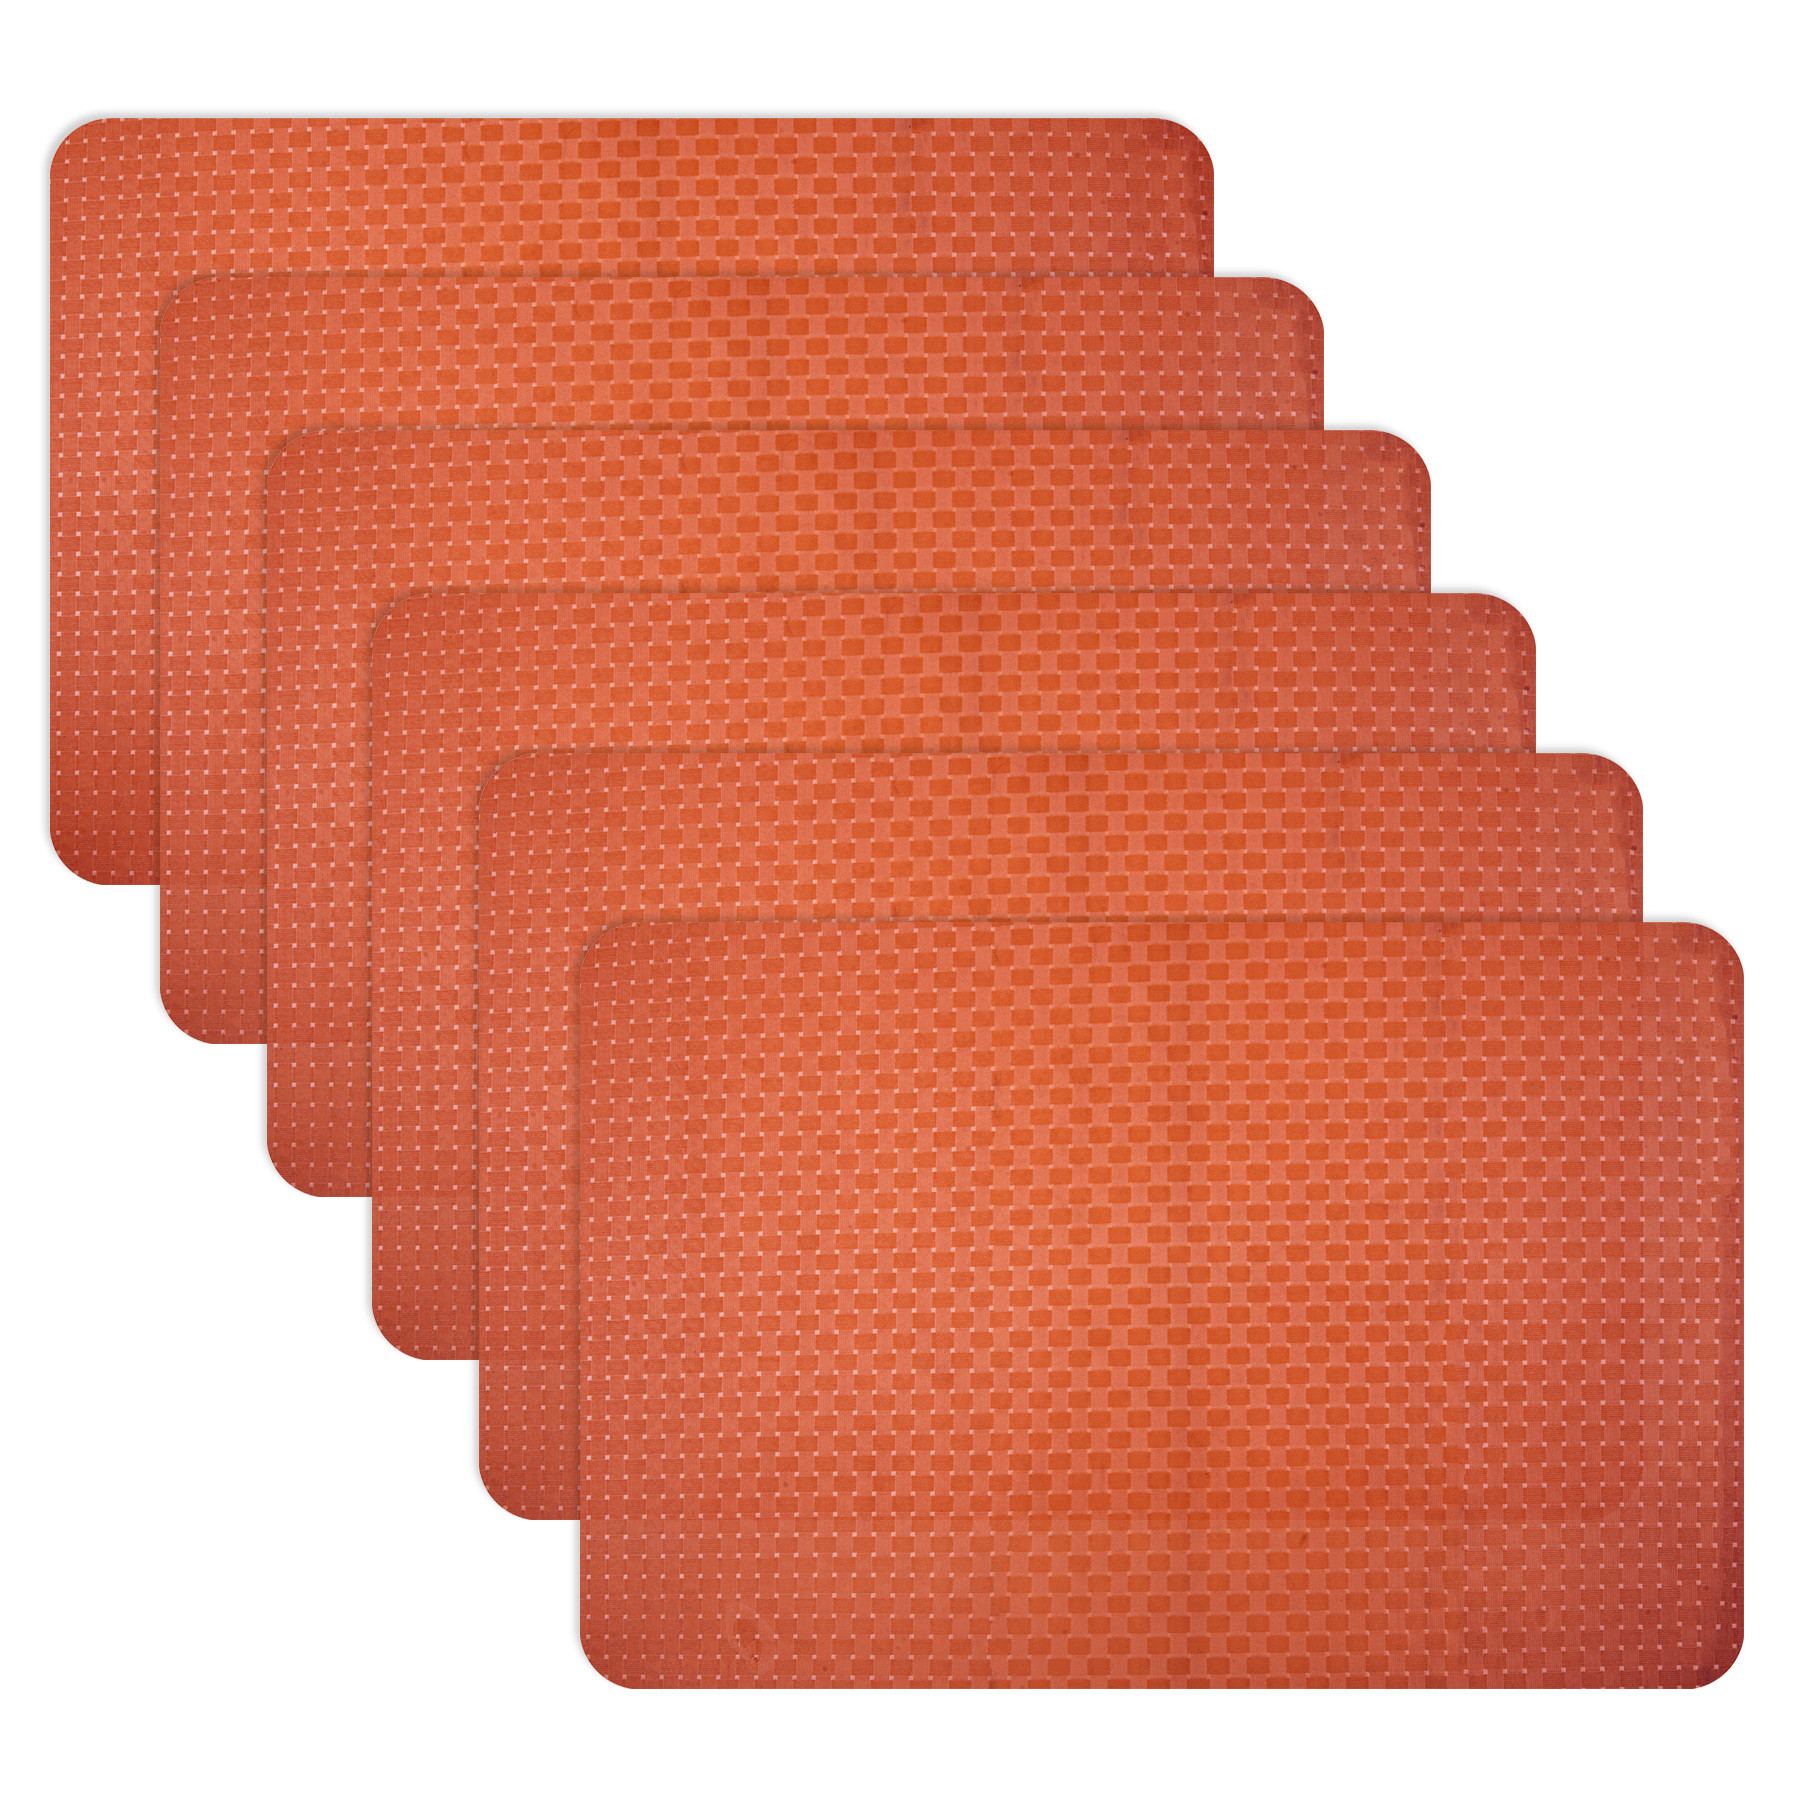 Kuber Industries Placemat | Placemats for Dining Room | Table Mat Set | Placemats for Kitchen Table | Dining Table Placemats | Check-Design Placemat | 6 Piece Set | Orange